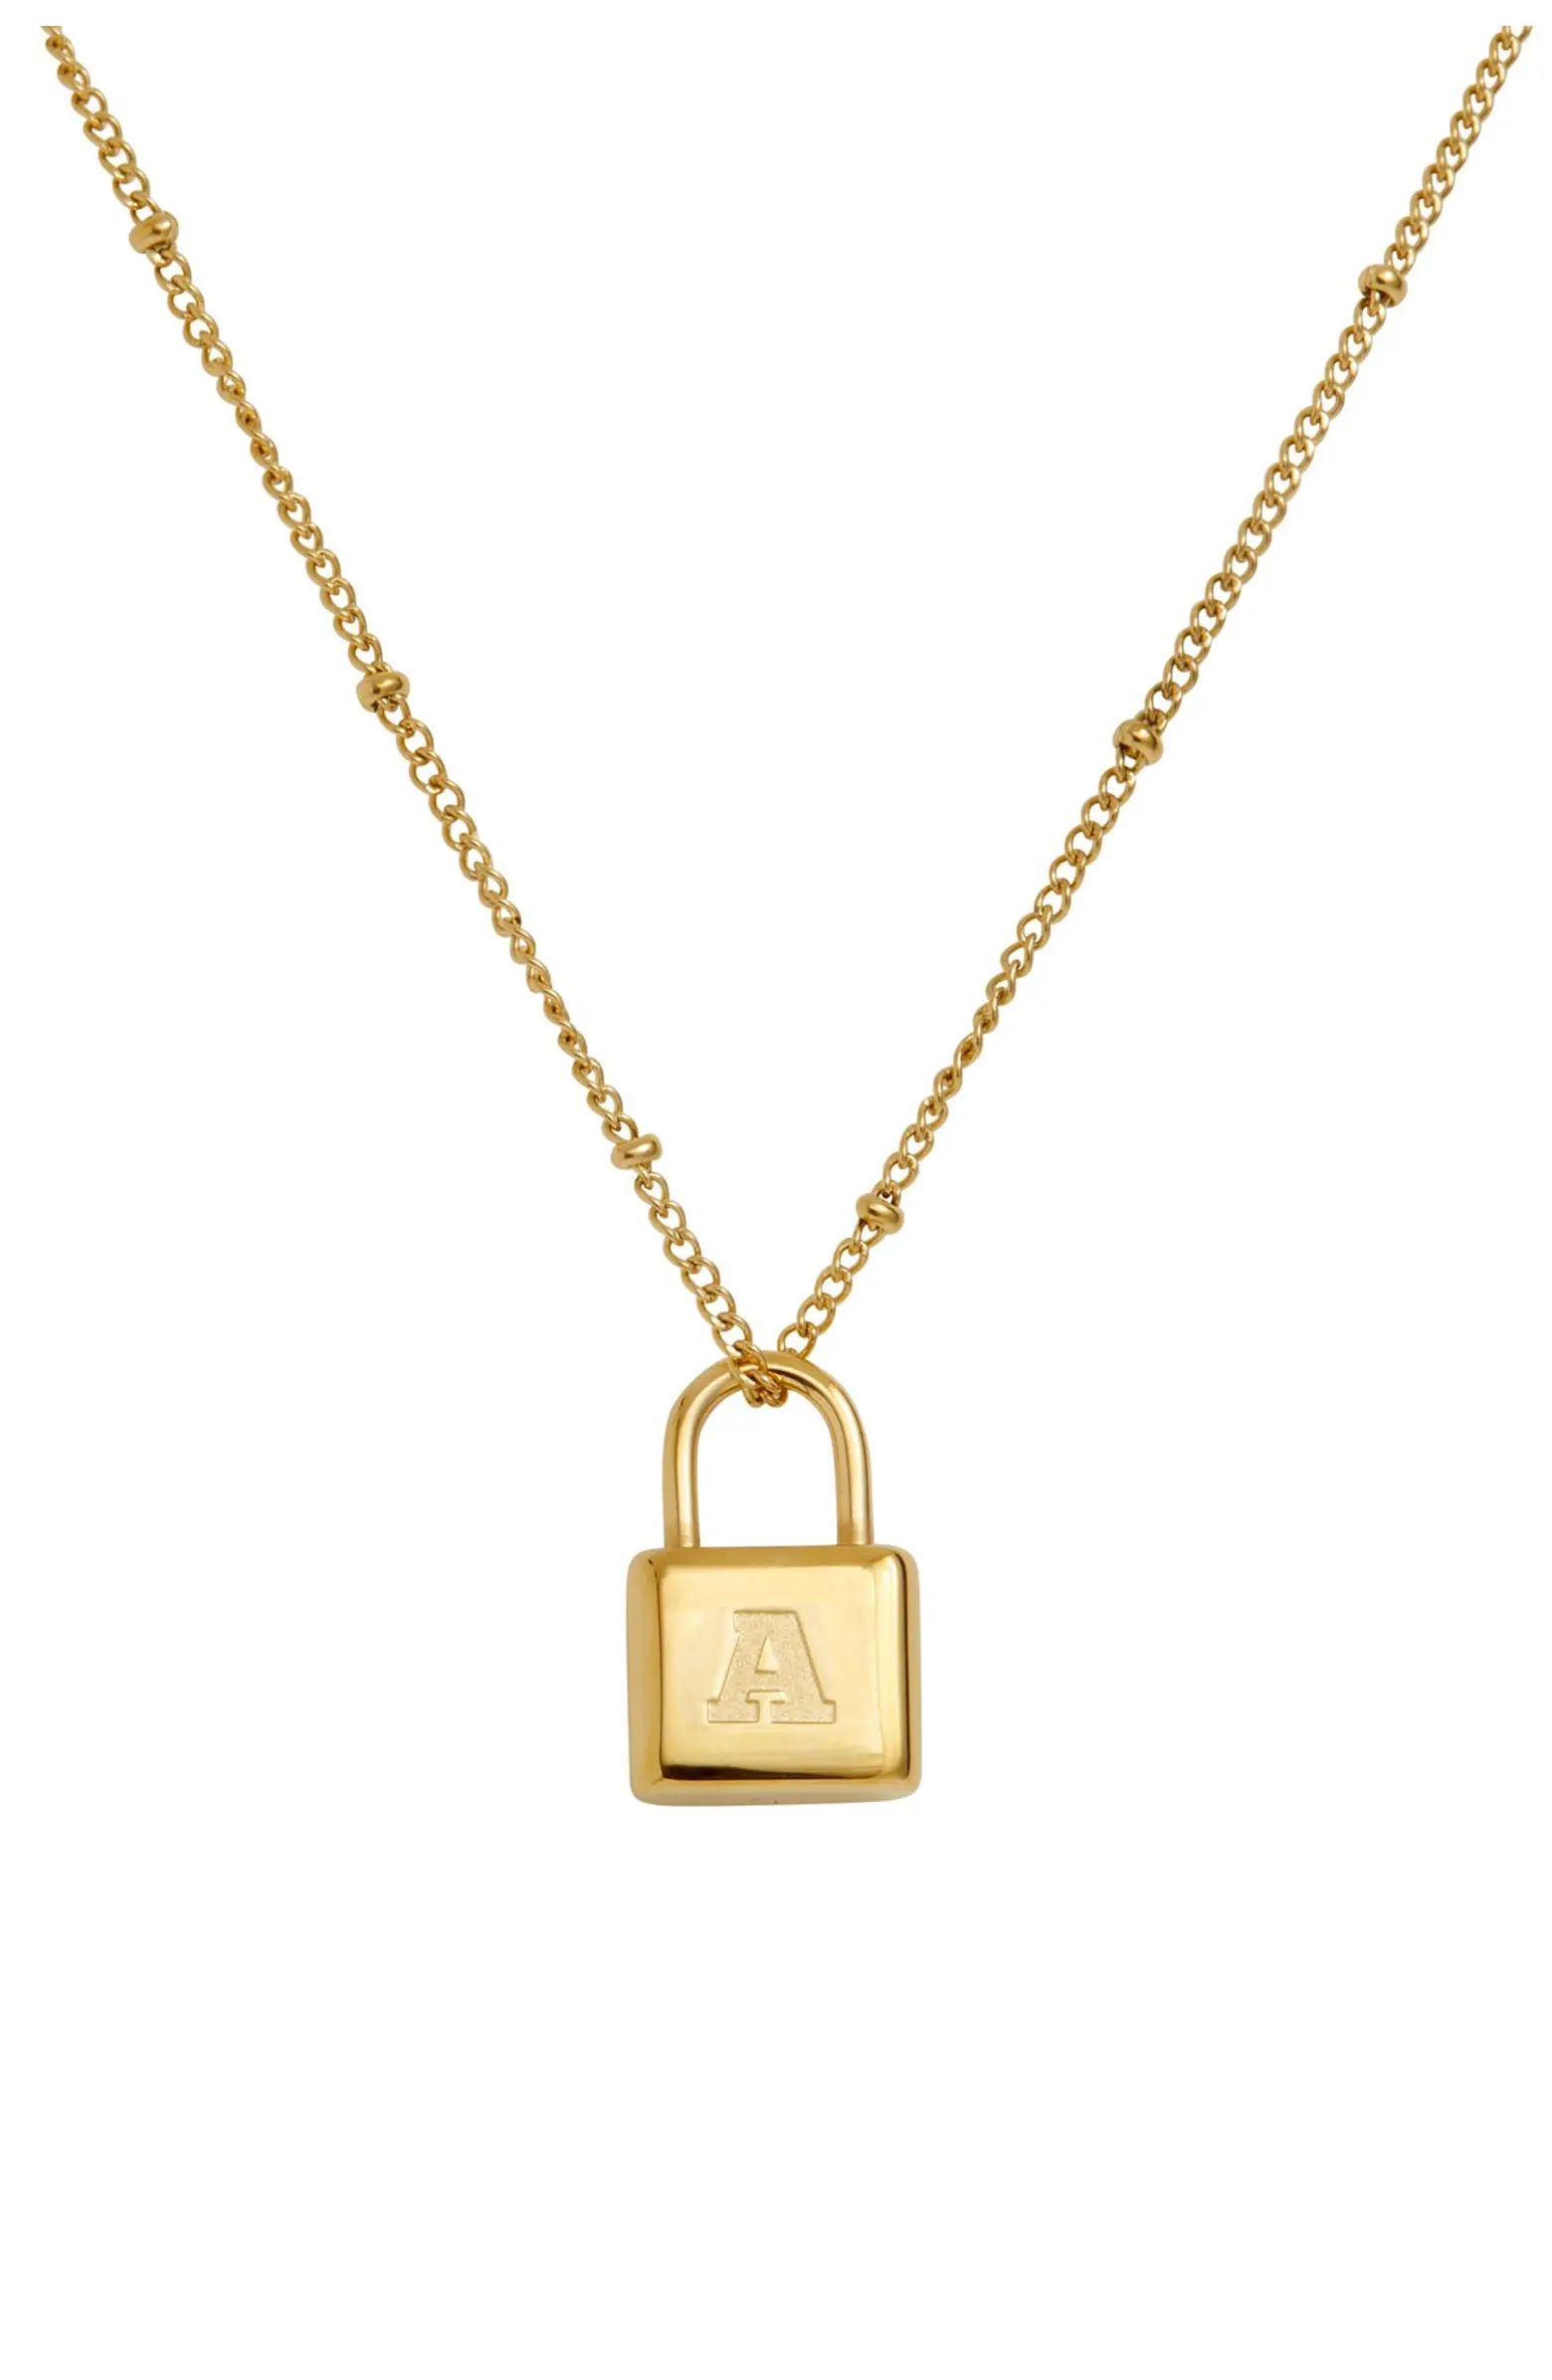 18K Gold Plated Stainless Steel Initial Lock Pendant Necklace | Nordstrom Rack